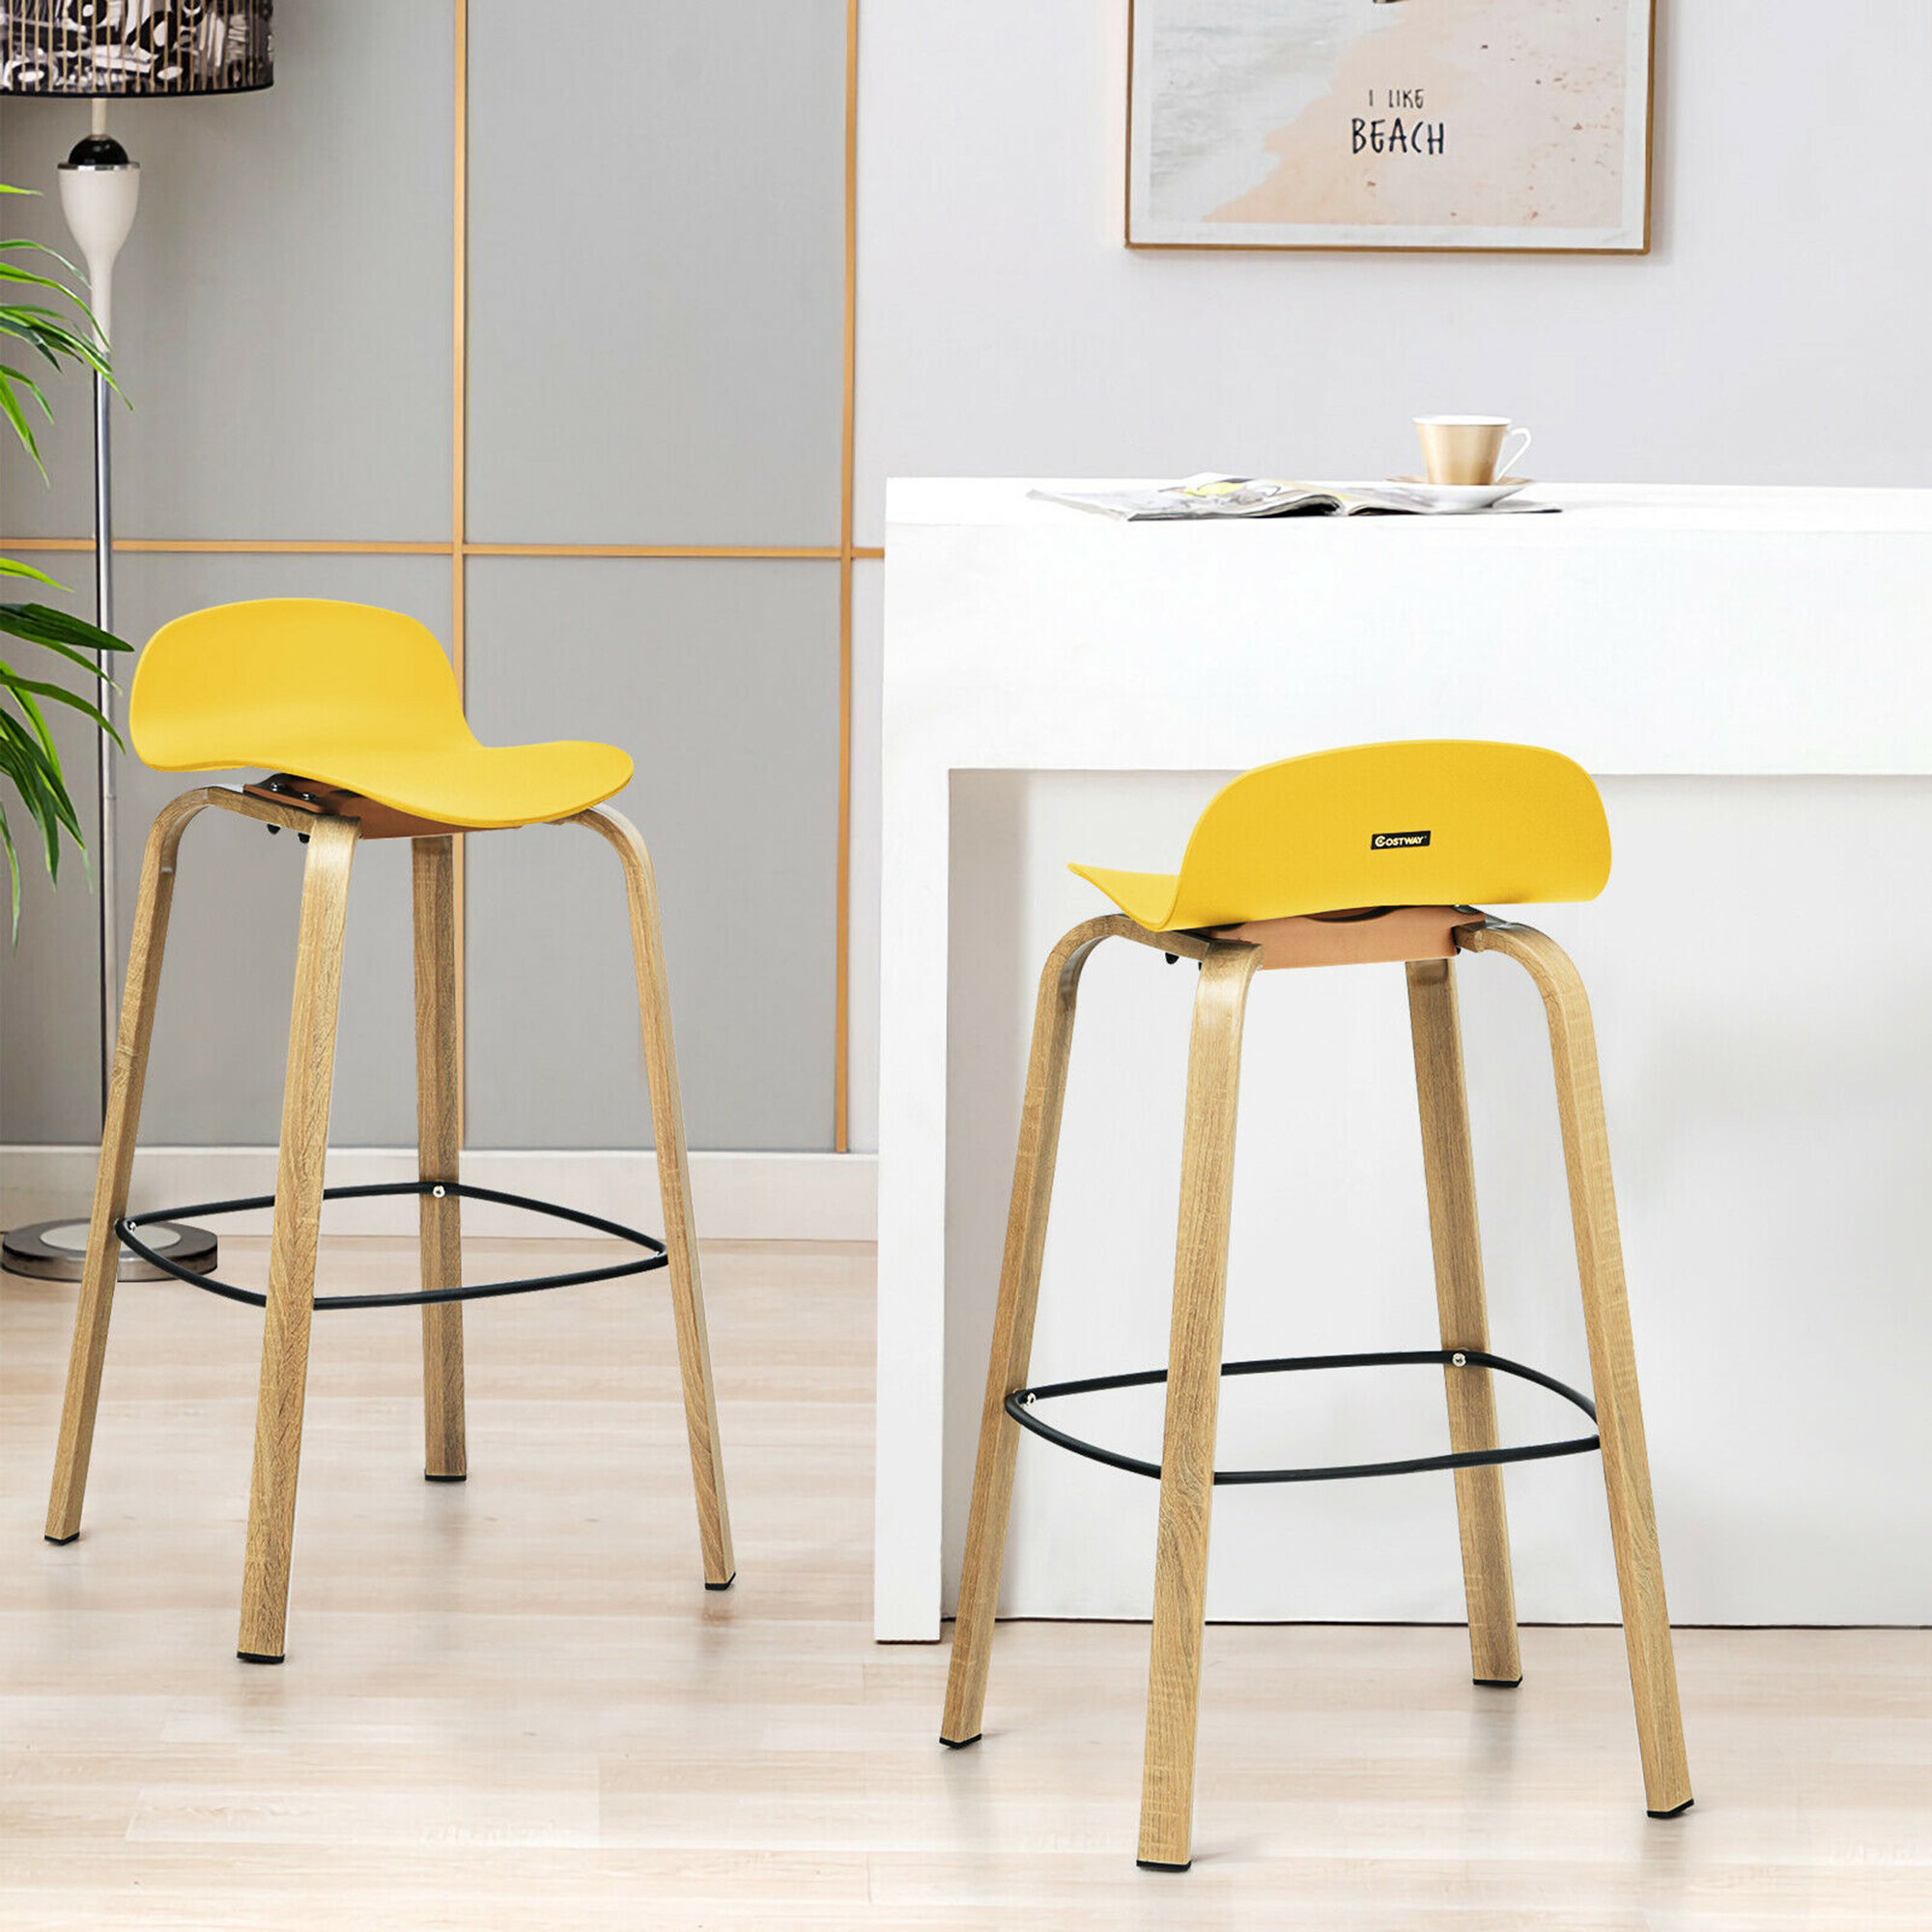 Costway Modern Set of 4 Barstools 30inch Pub Chairs w/Low Back & Metal Legs Yellow